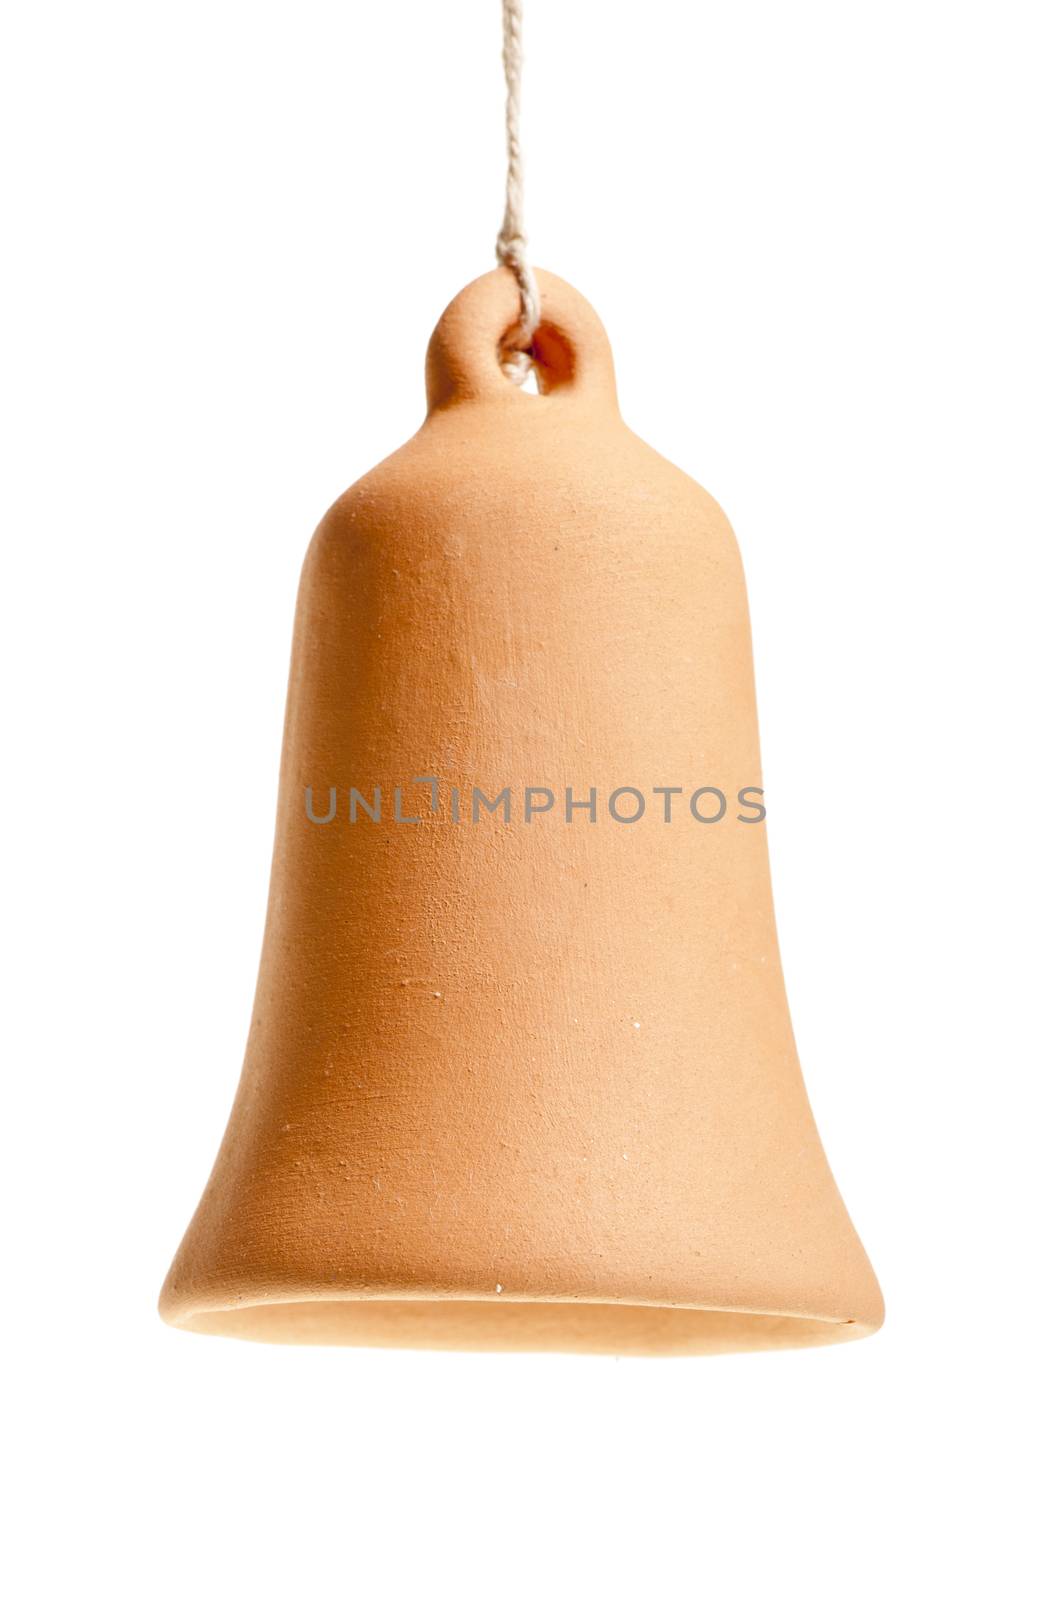 handmade clay bell hanging from a rope on a white background